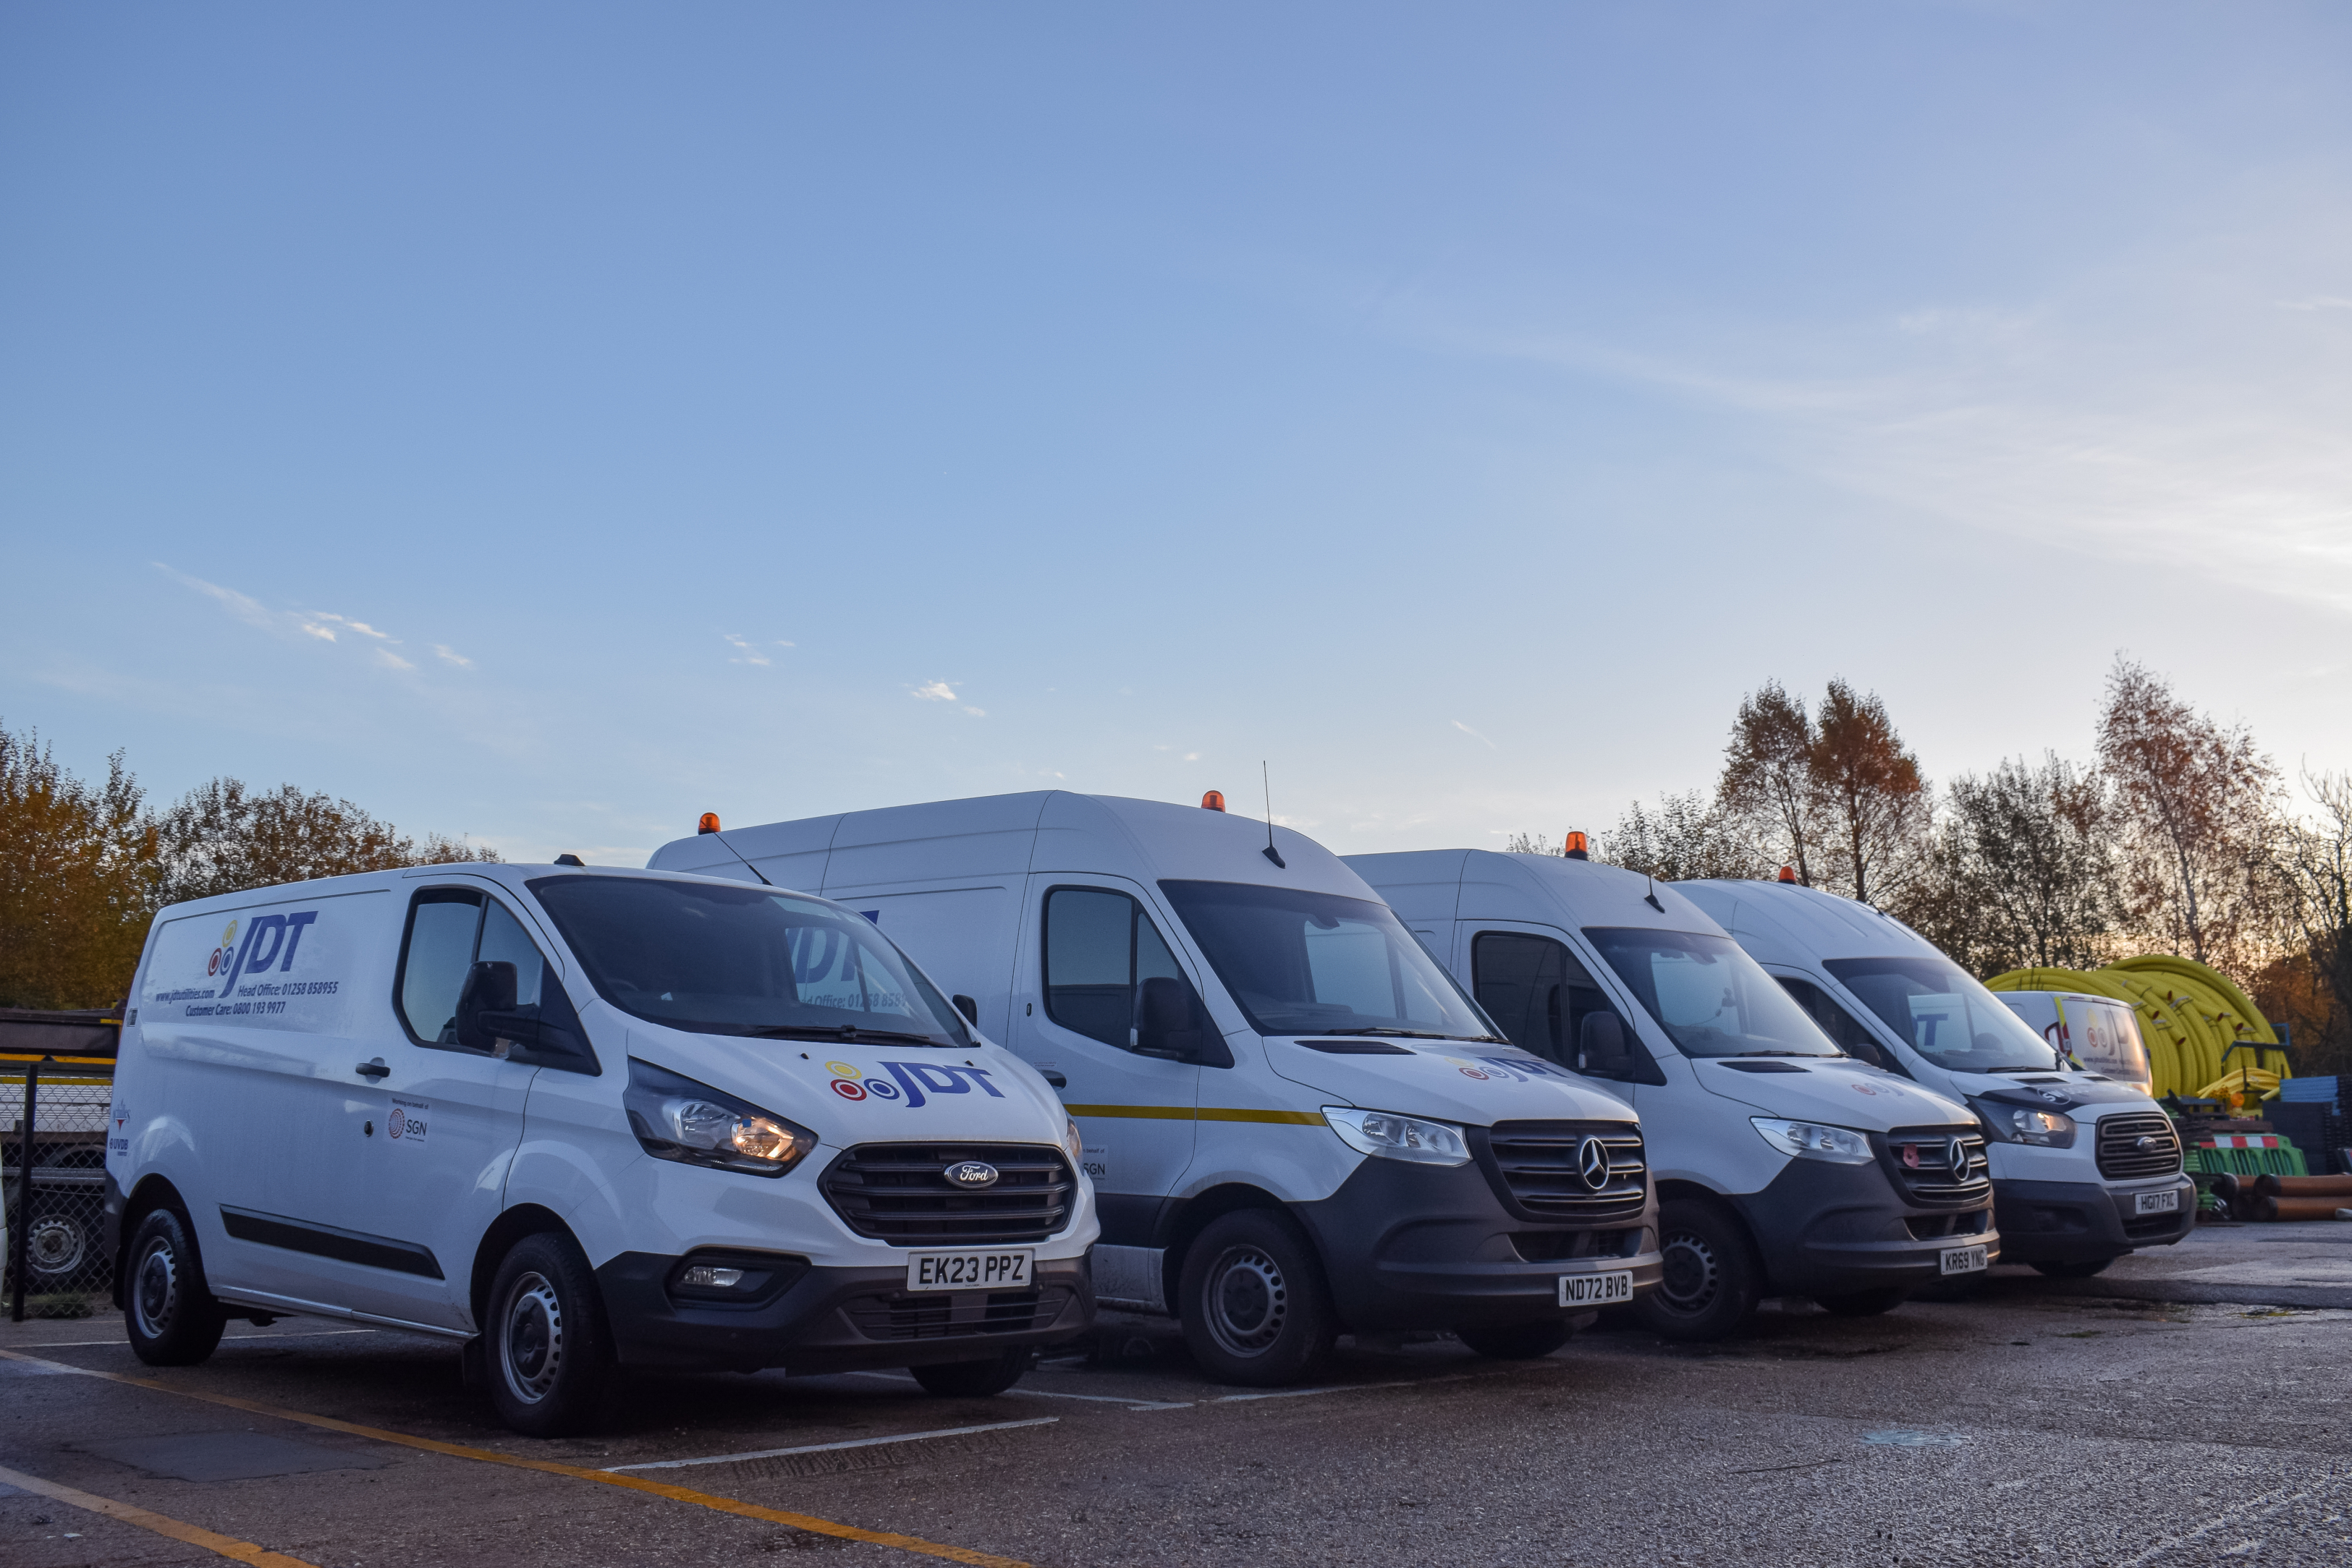 Dawsongroup vans is providing JDT Utilities with flexibility